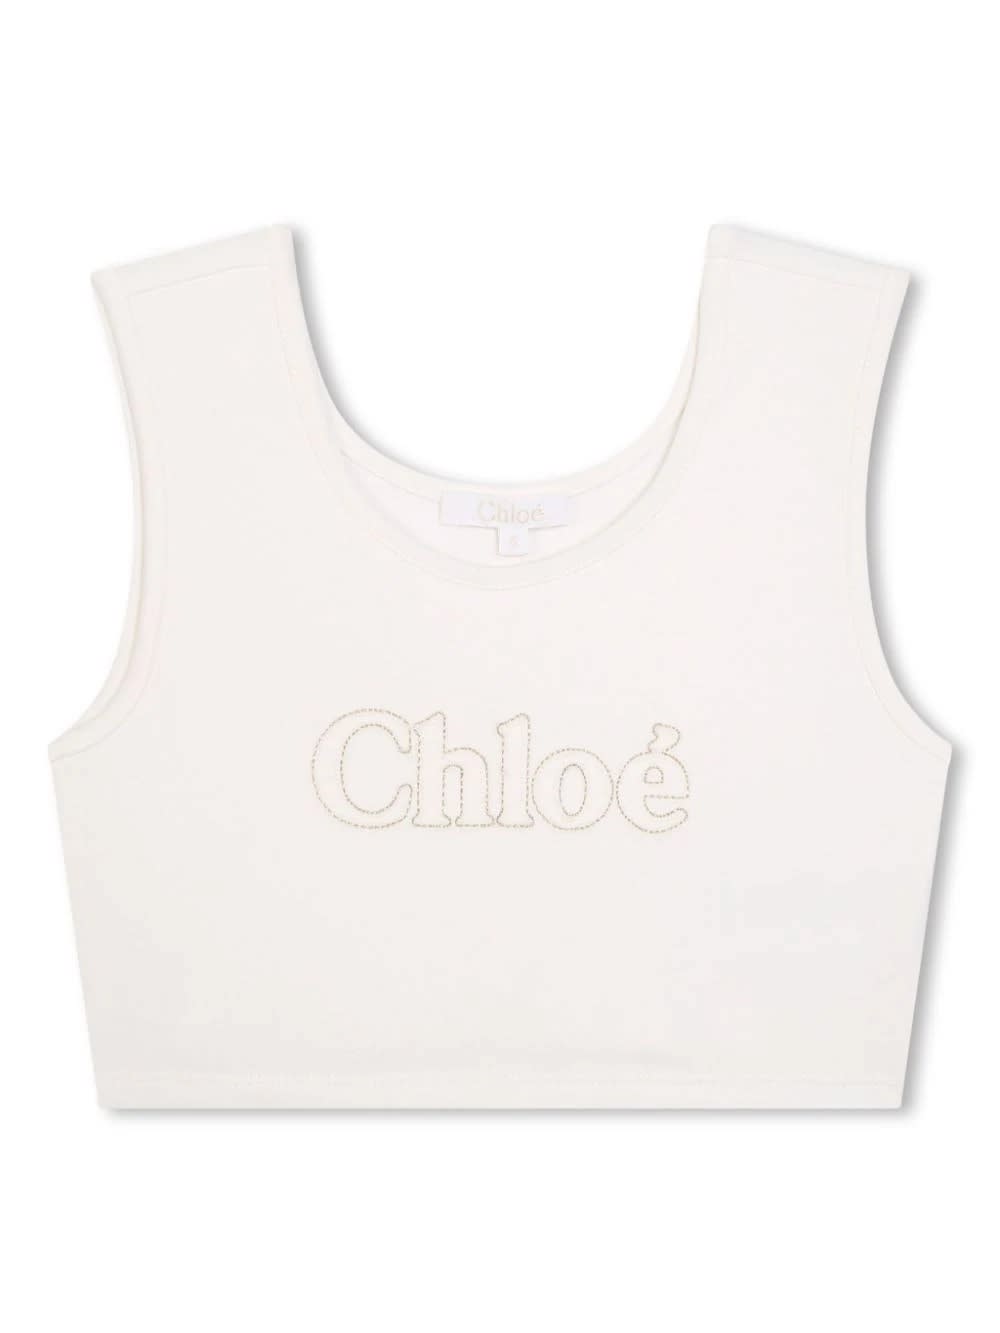 CHLOÉ WHITE CROP TOP WITH EMBROIDERED LOGO